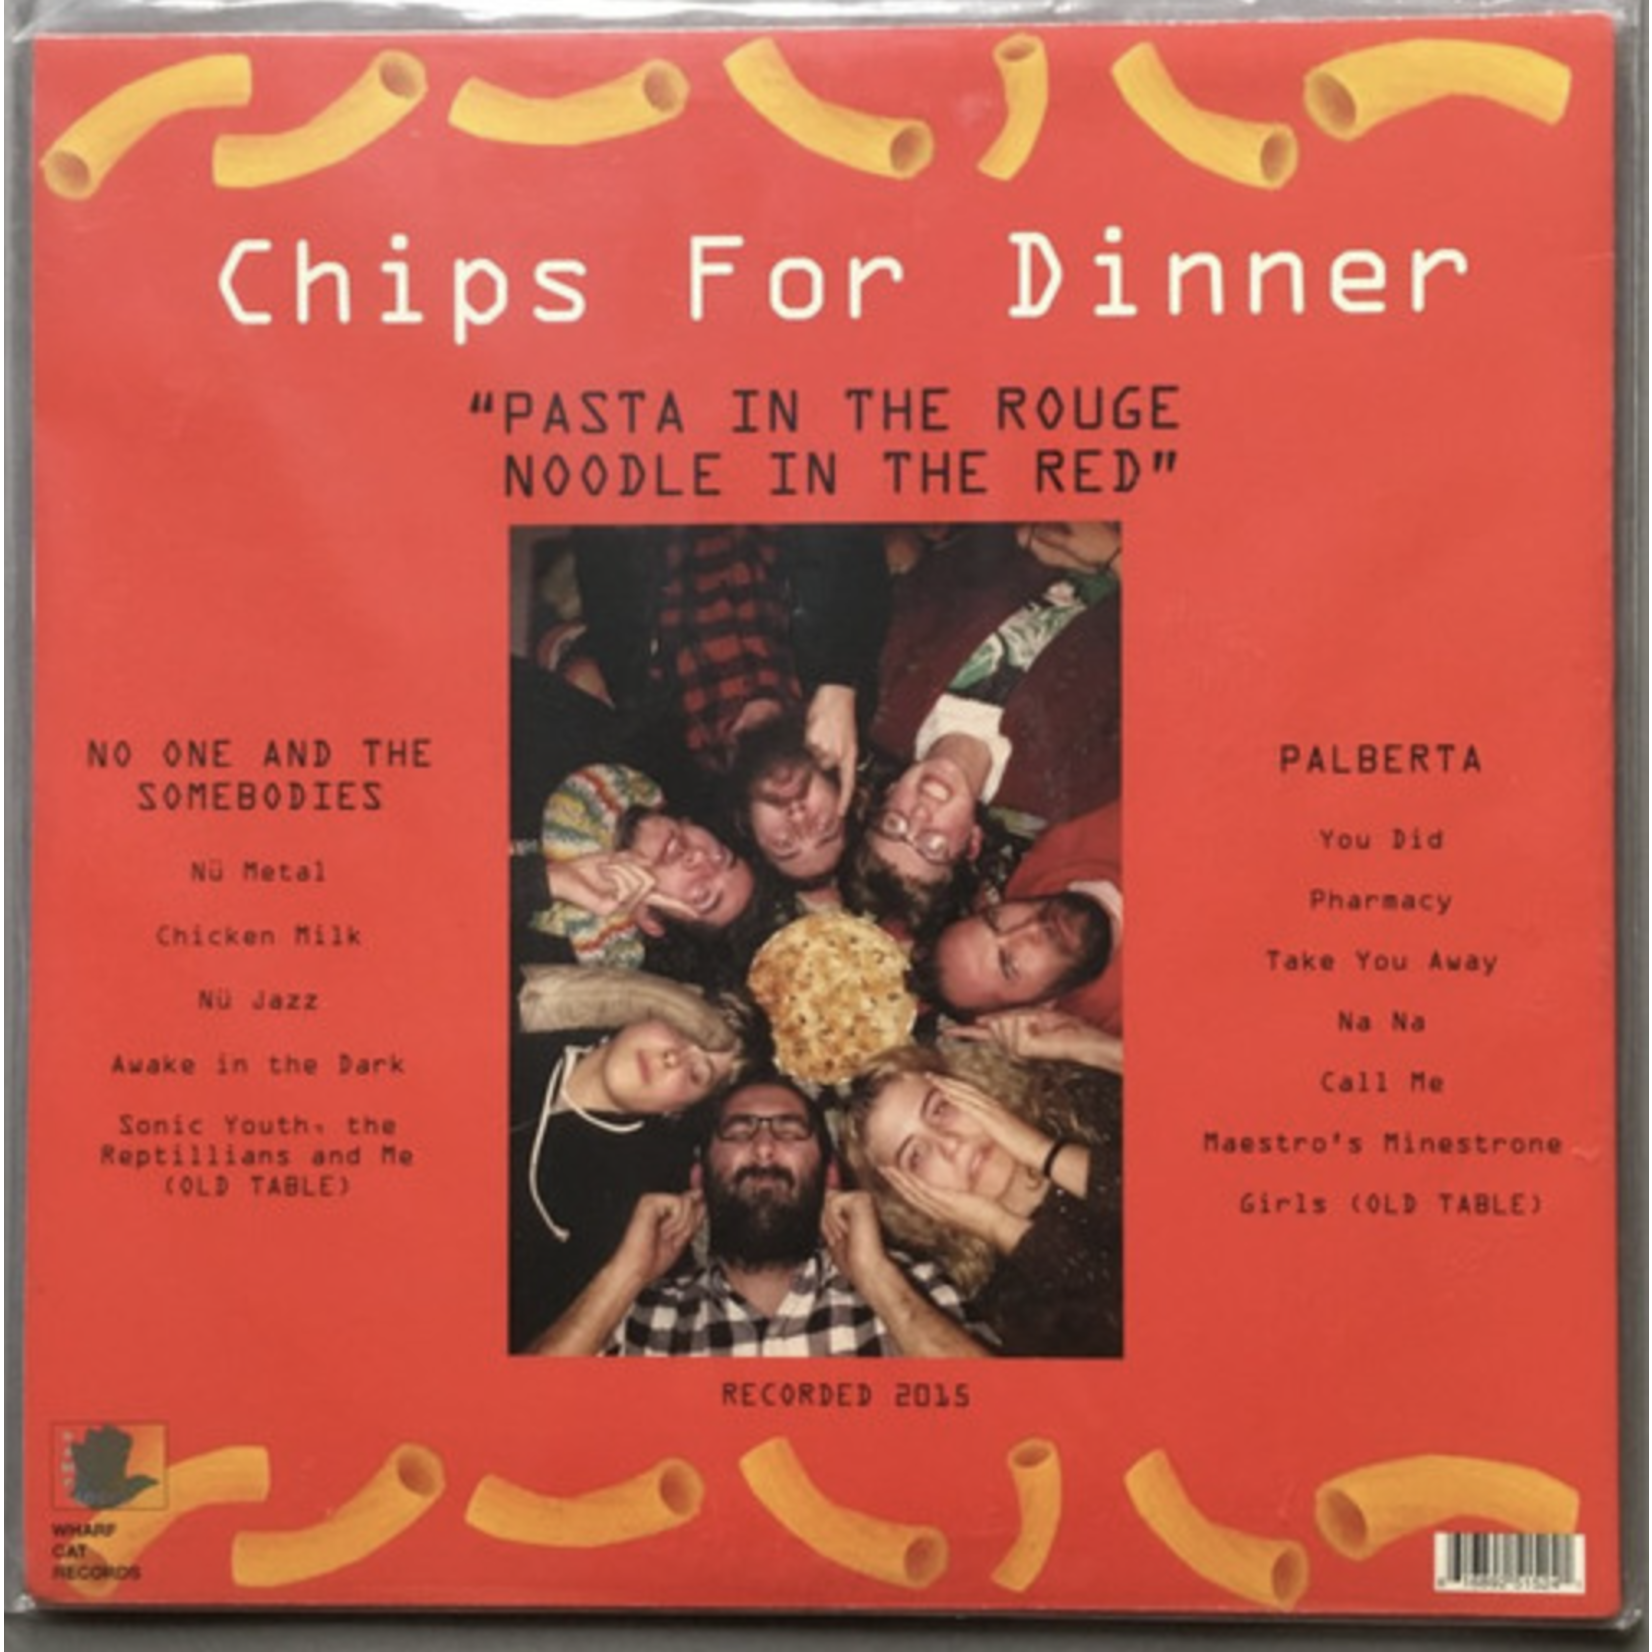 Wharf Cat Palberta & No One and the Somebodies - Chips for Dinner (LP)